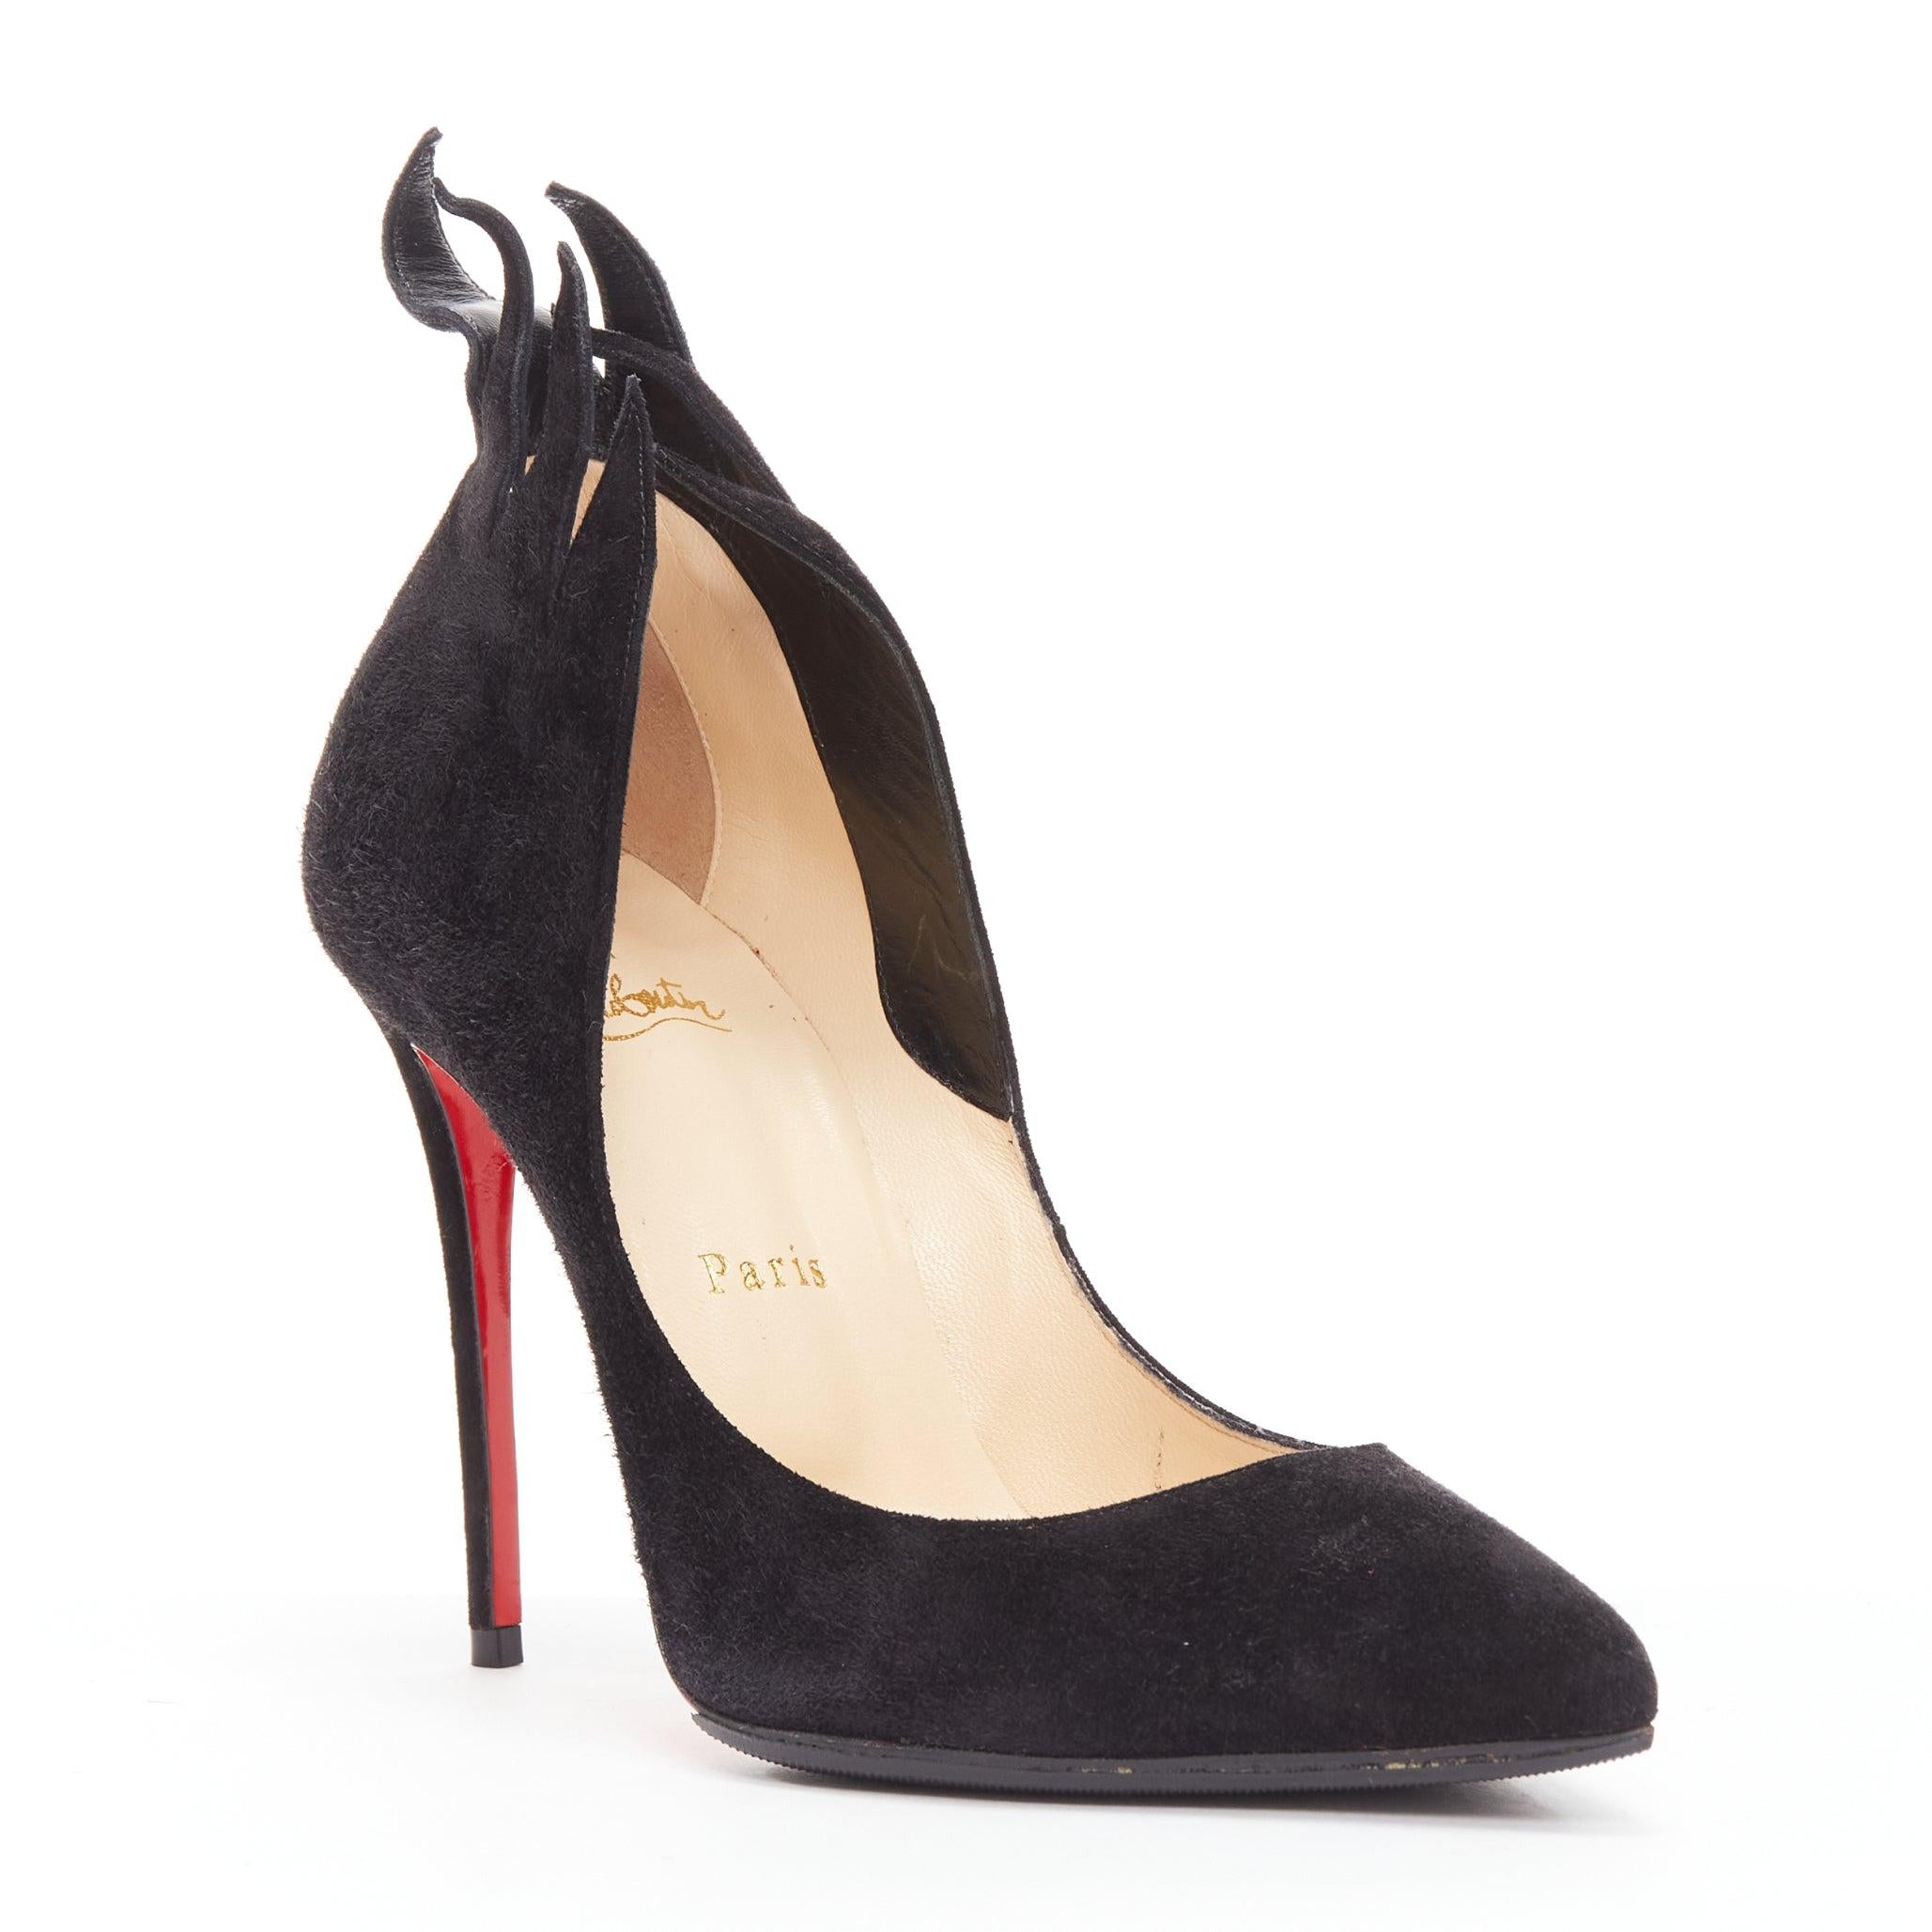 CHRISTIAN LOUBOUTIN Victorina Flame black suede stiletto pigalle pump EU37
Reference: NKLL/A00111
Brand: Christian Louboutin
Model: Victorina Flame
Material: Suede
Color: Black
Pattern: Solid
Lining: Brown Leather
Made in: